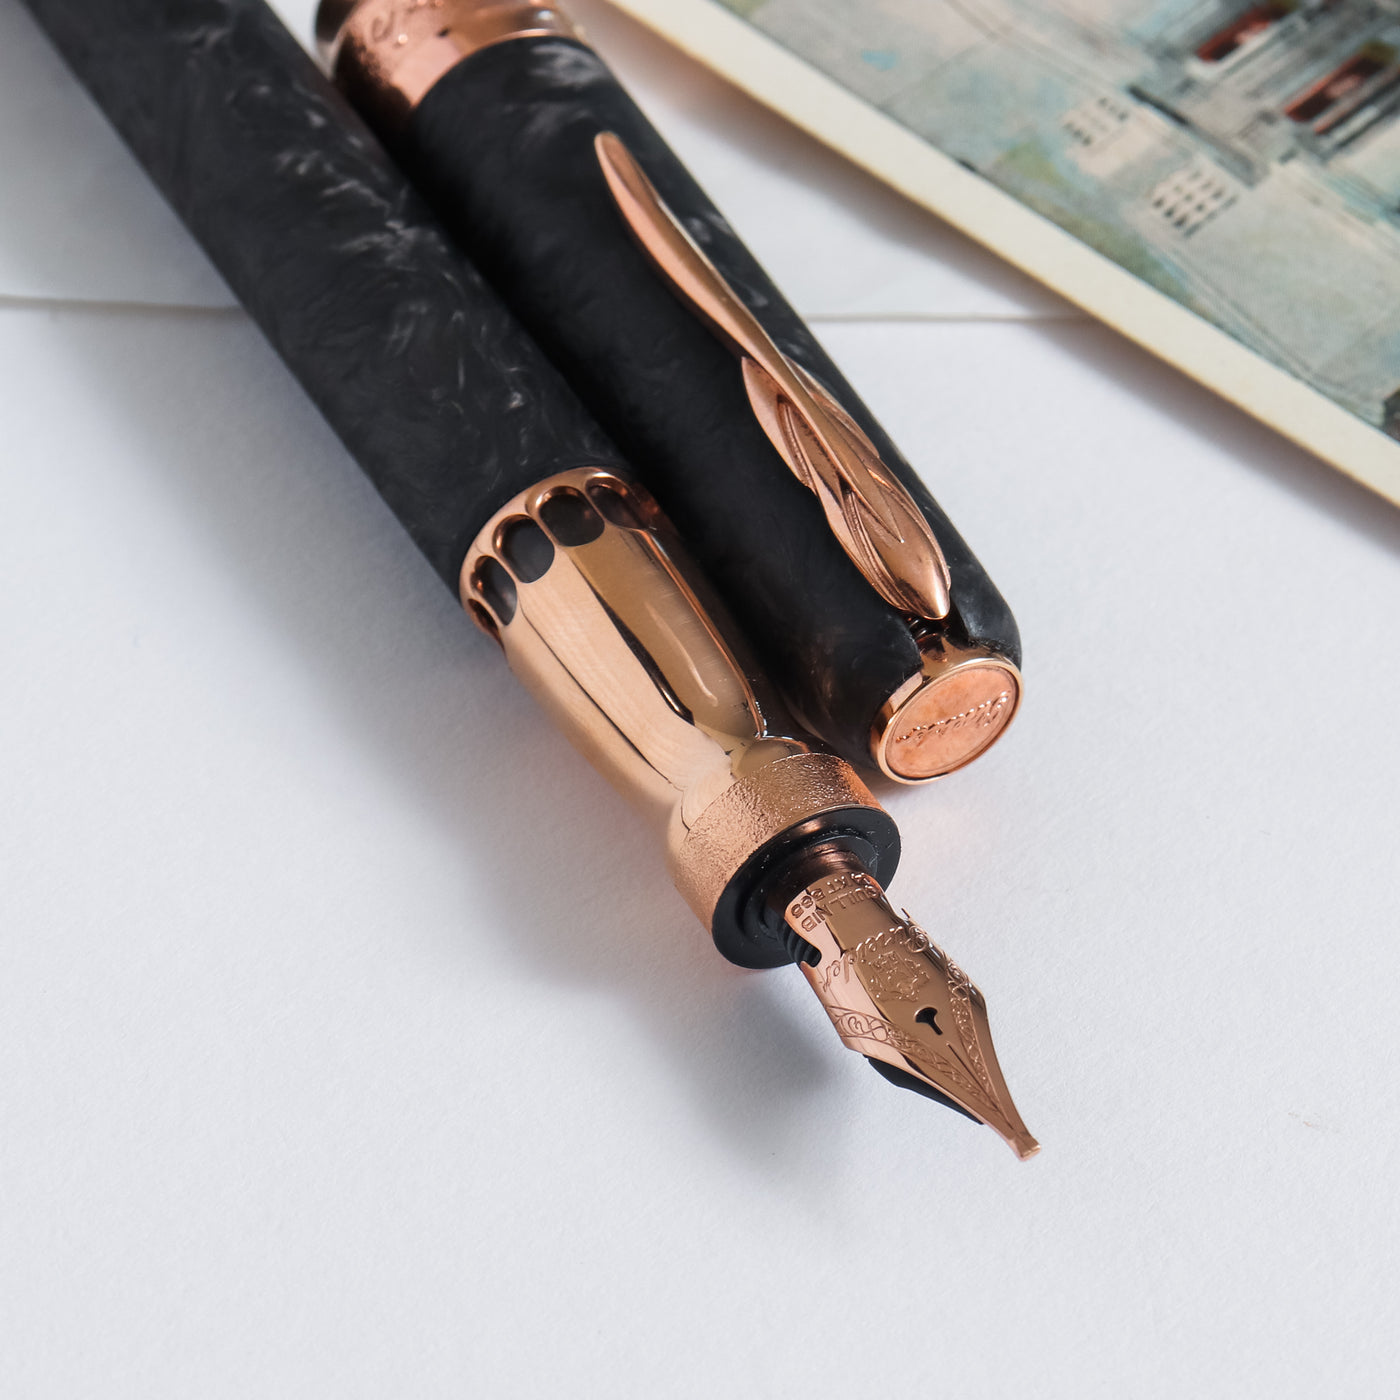 Pineider Mystery Filler Forged Carbon Rose Gold Fountain Pen